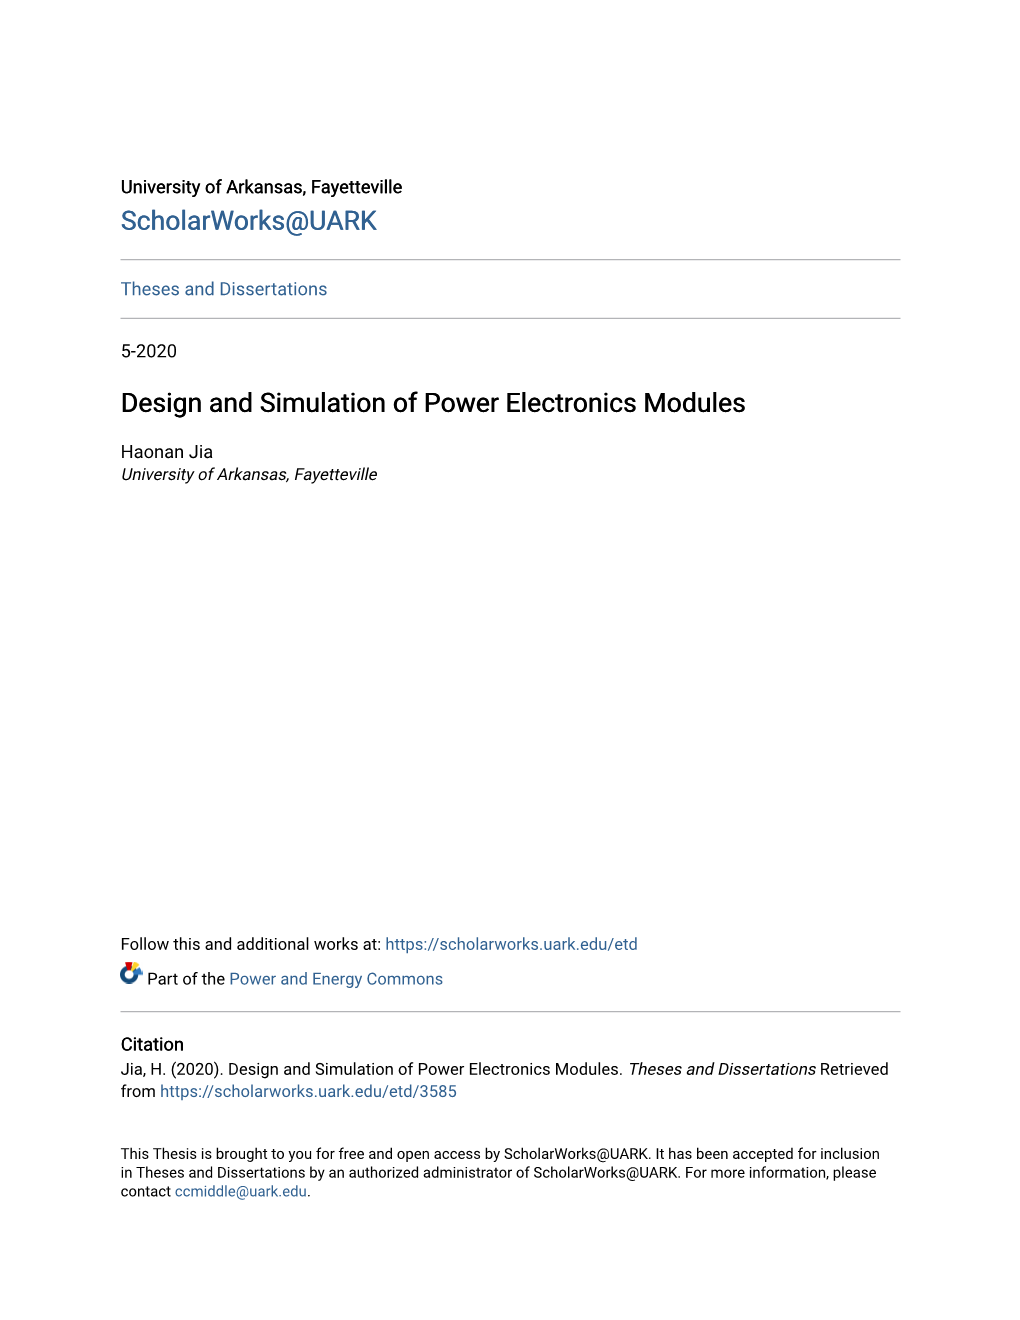 Design and Simulation of Power Electronics Modules